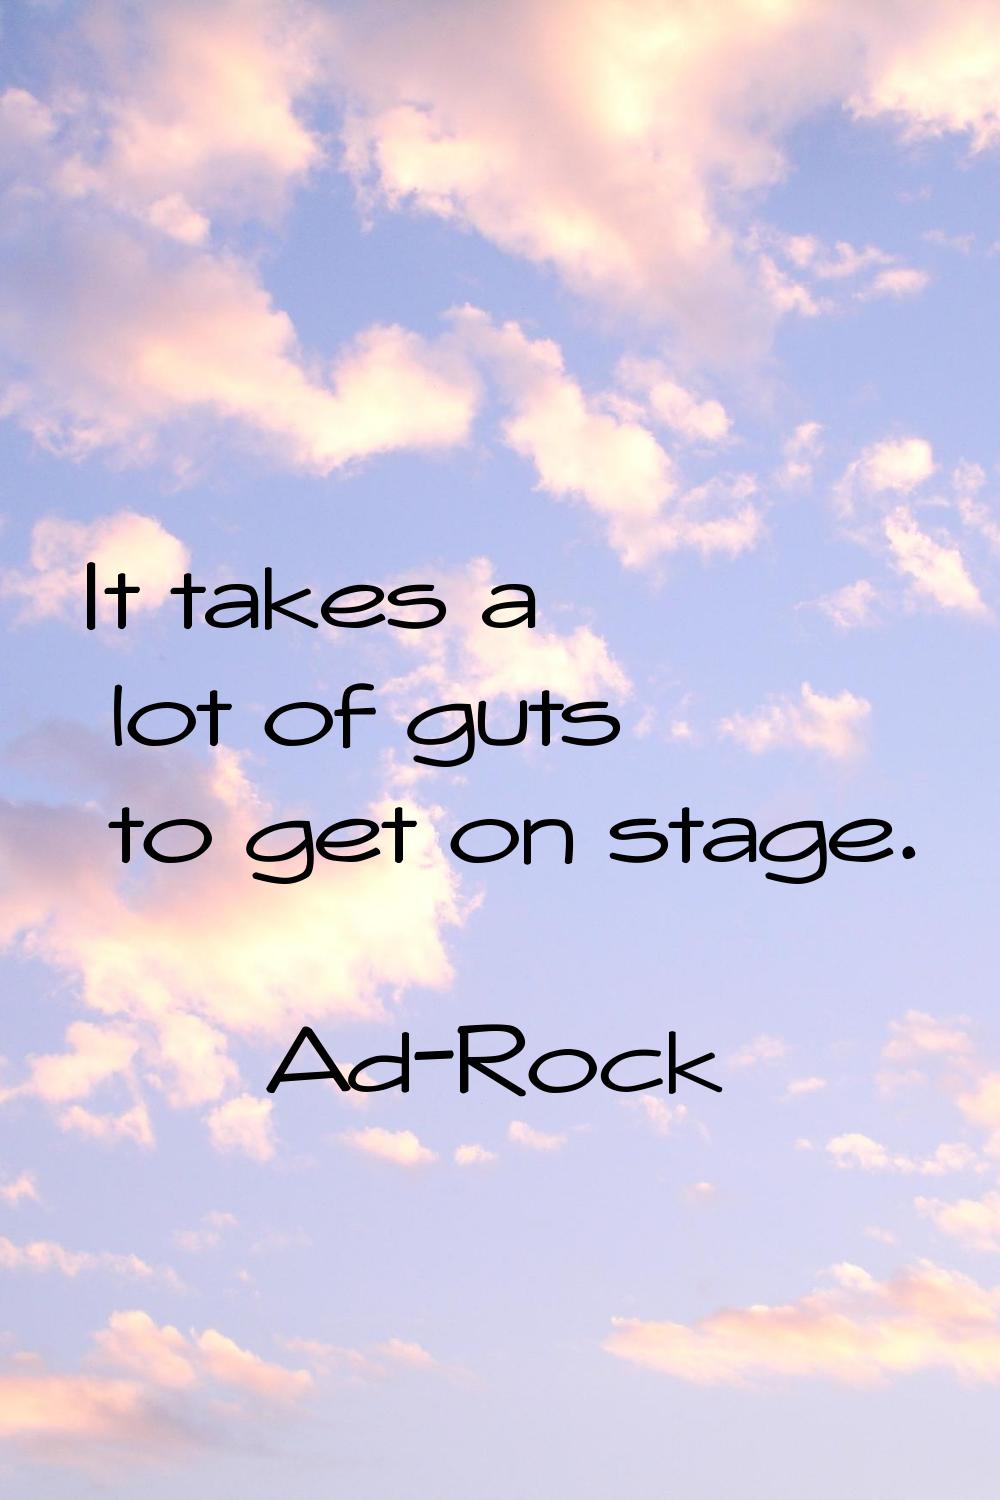 It takes a lot of guts to get on stage.